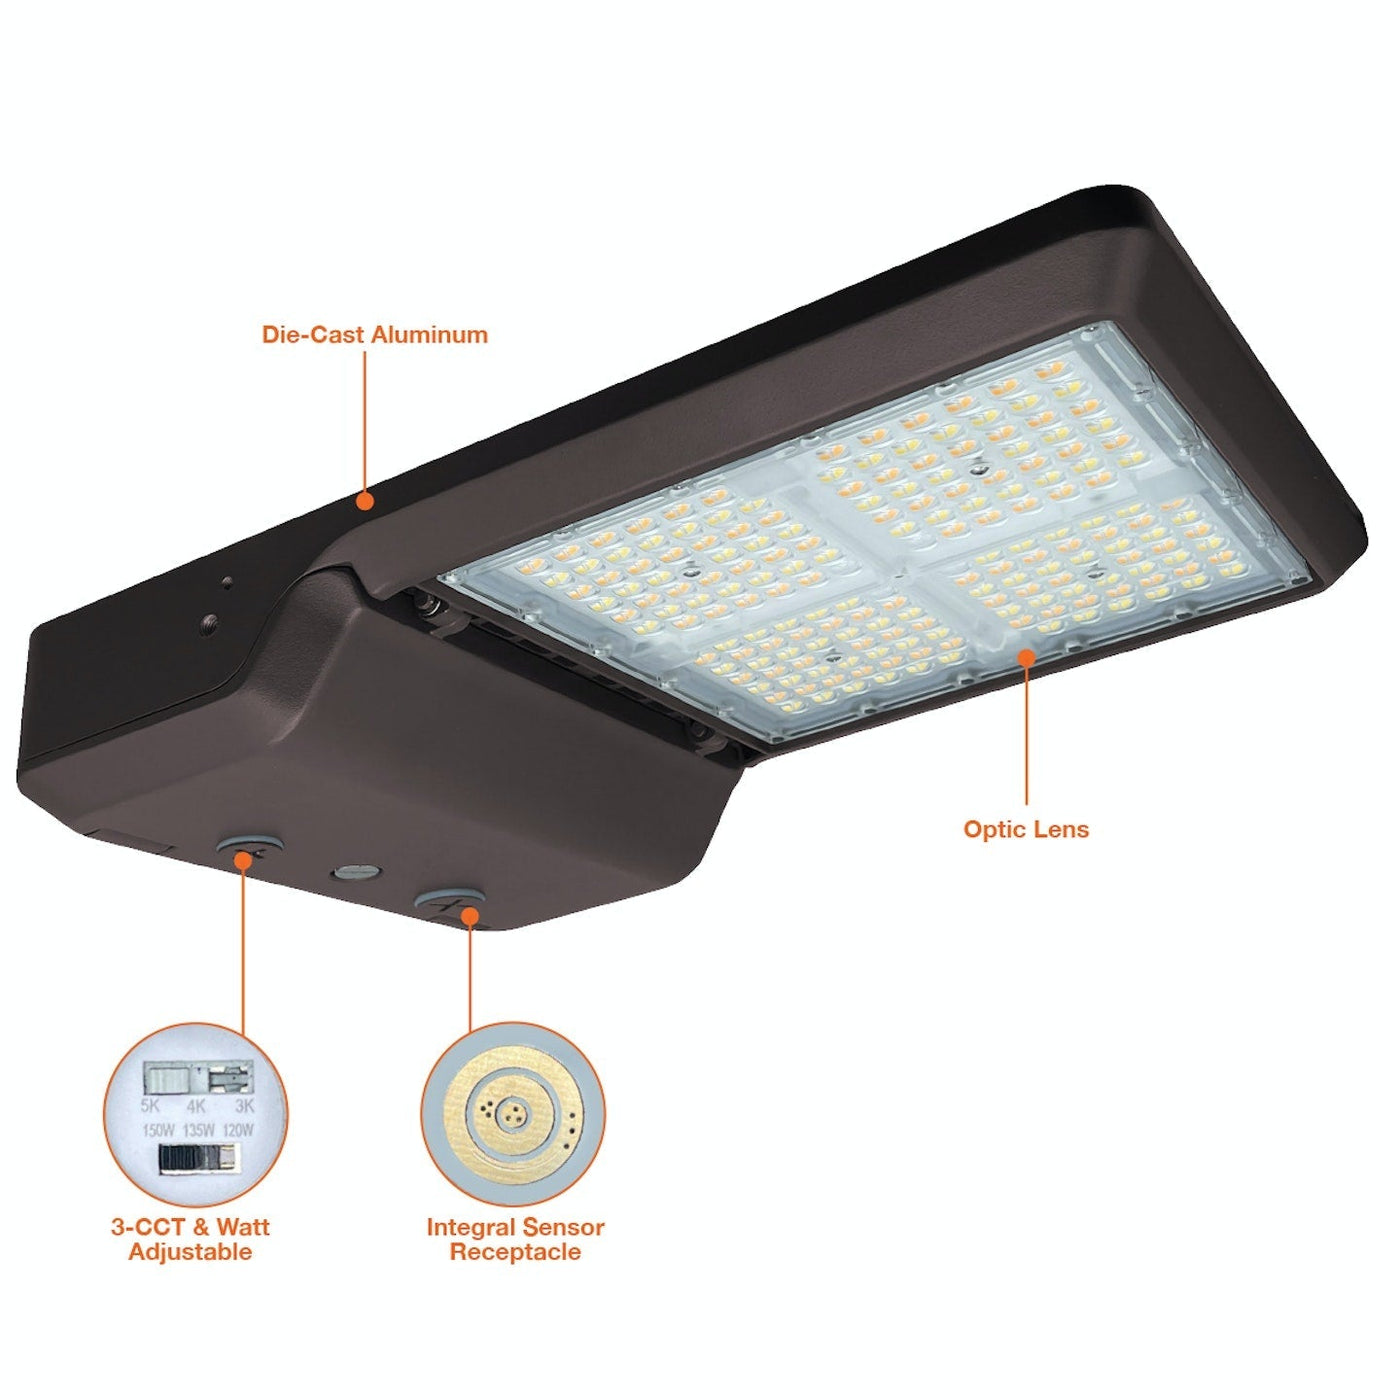 Large LED Area/Parking Lot Light, 33600 Lumen Max, Wattage and CCT Selectable, 120-277V, Bronze Finish